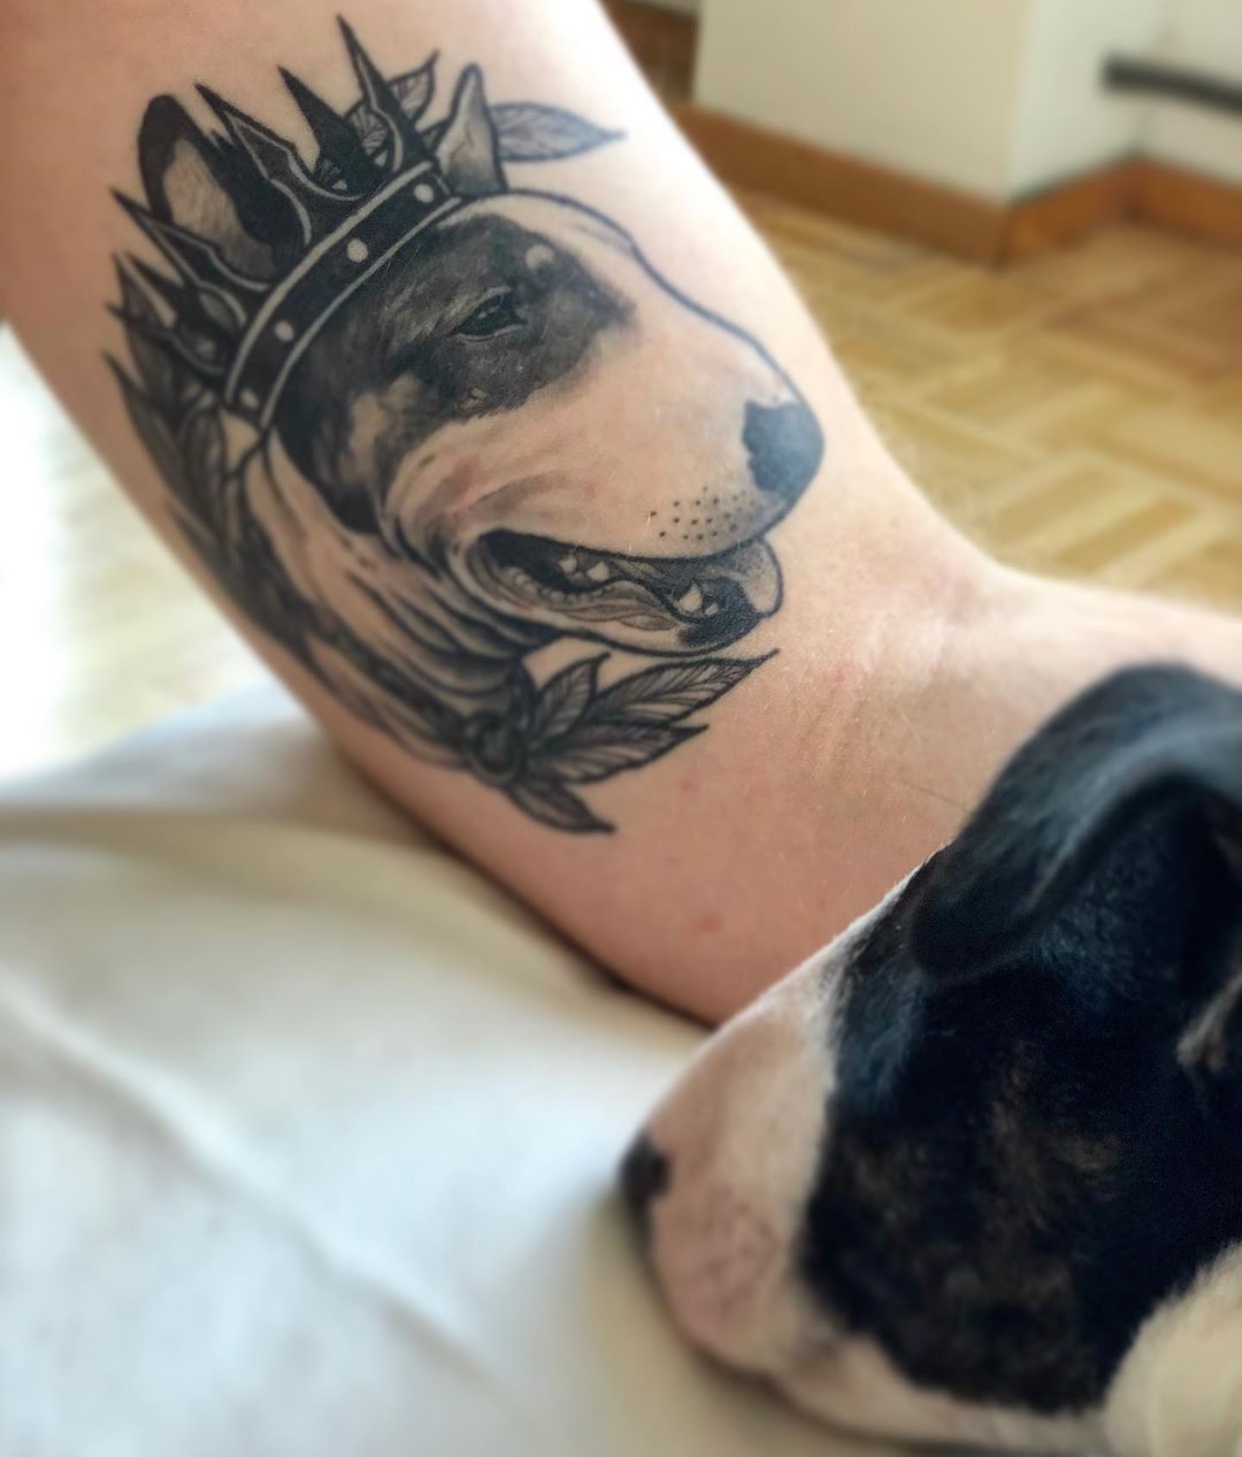 Bull Terrier wearing a crown tattoo on the biceps